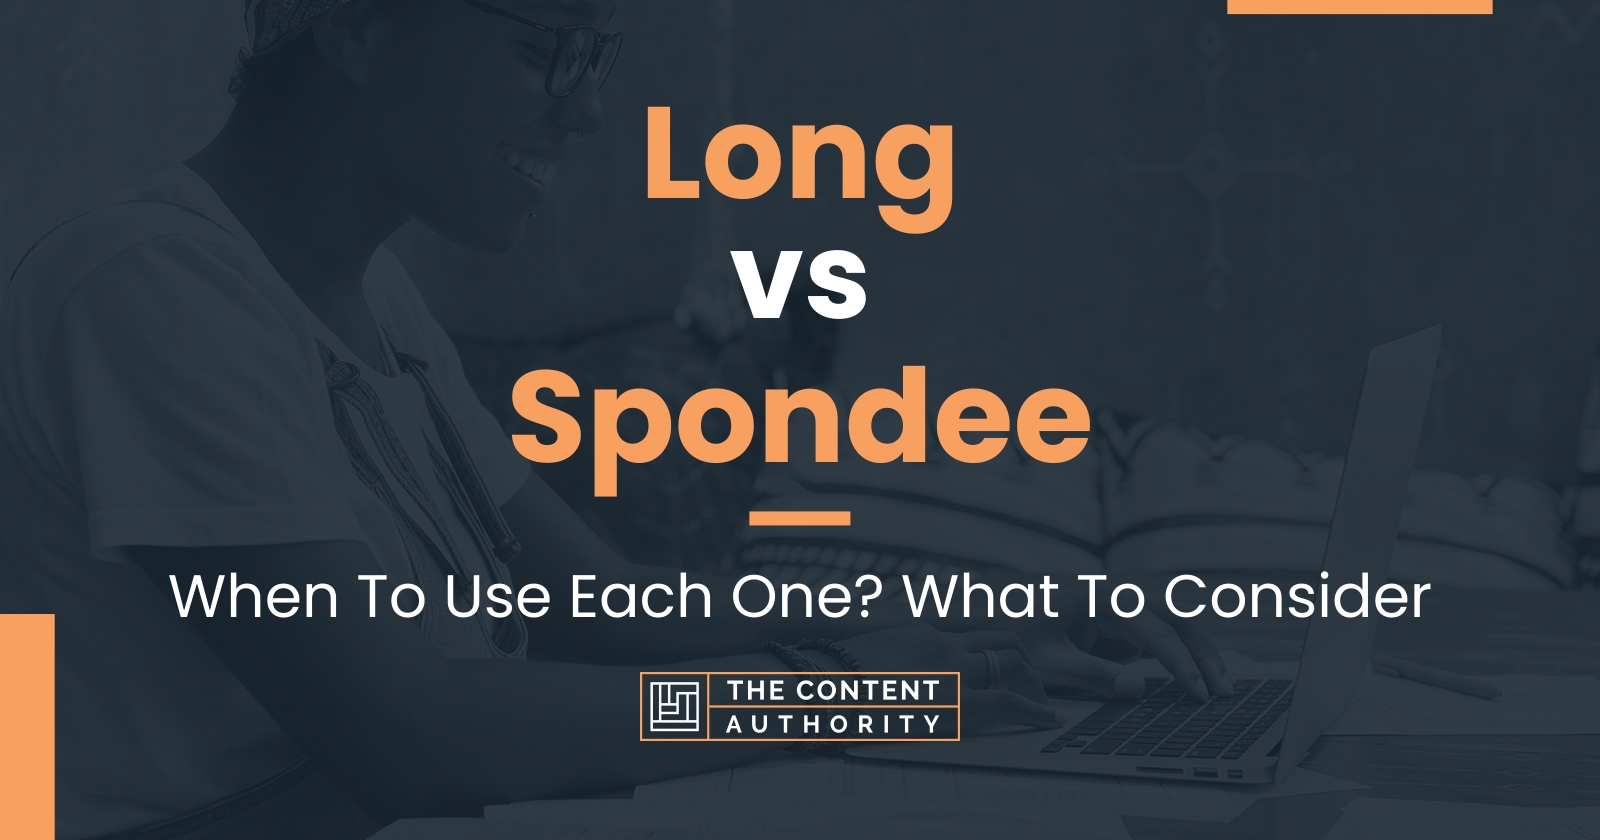 Long Vs Spondee When To Use Each One What To Consider